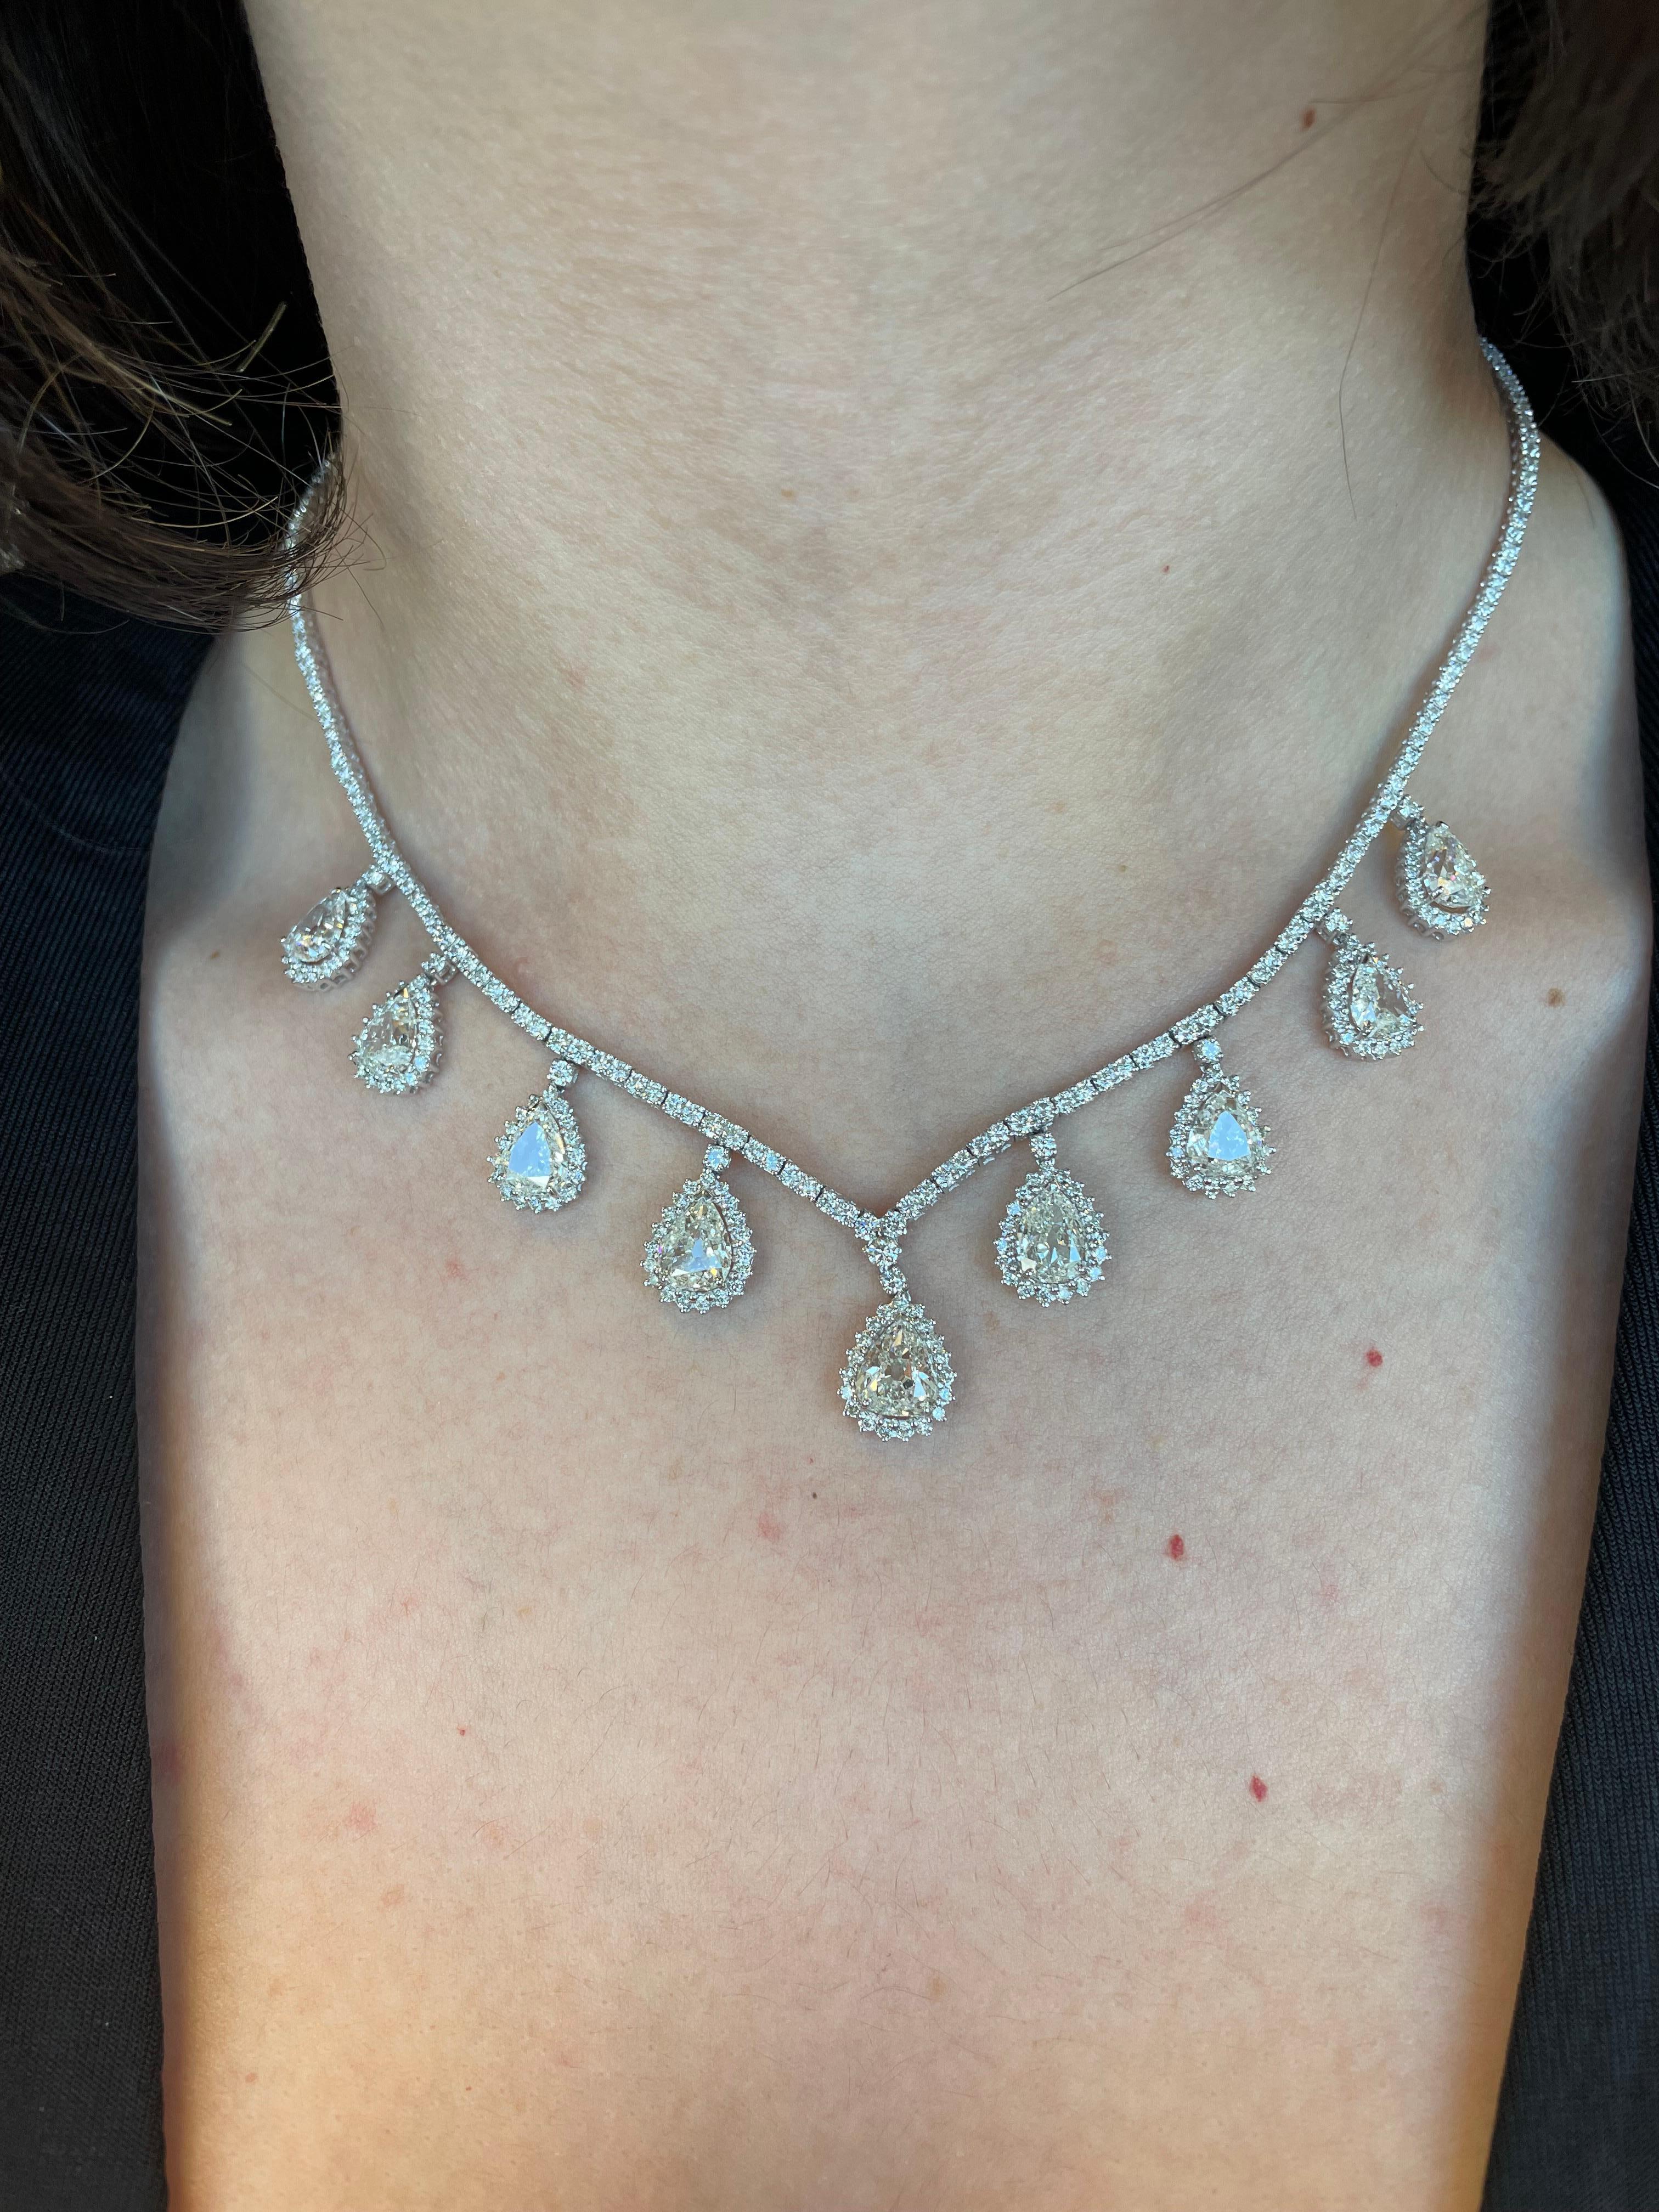 Exquisite dangling old pear cut diamond high jewelry necklace.
390 diamonds total, 15.91 carats total. 9 old pear cut diamonds 9.81ct, approximately I/J color and VS2/SI1 clarity. 381 round brilliant diamonds 6.10ct, approximately H/I color and SI